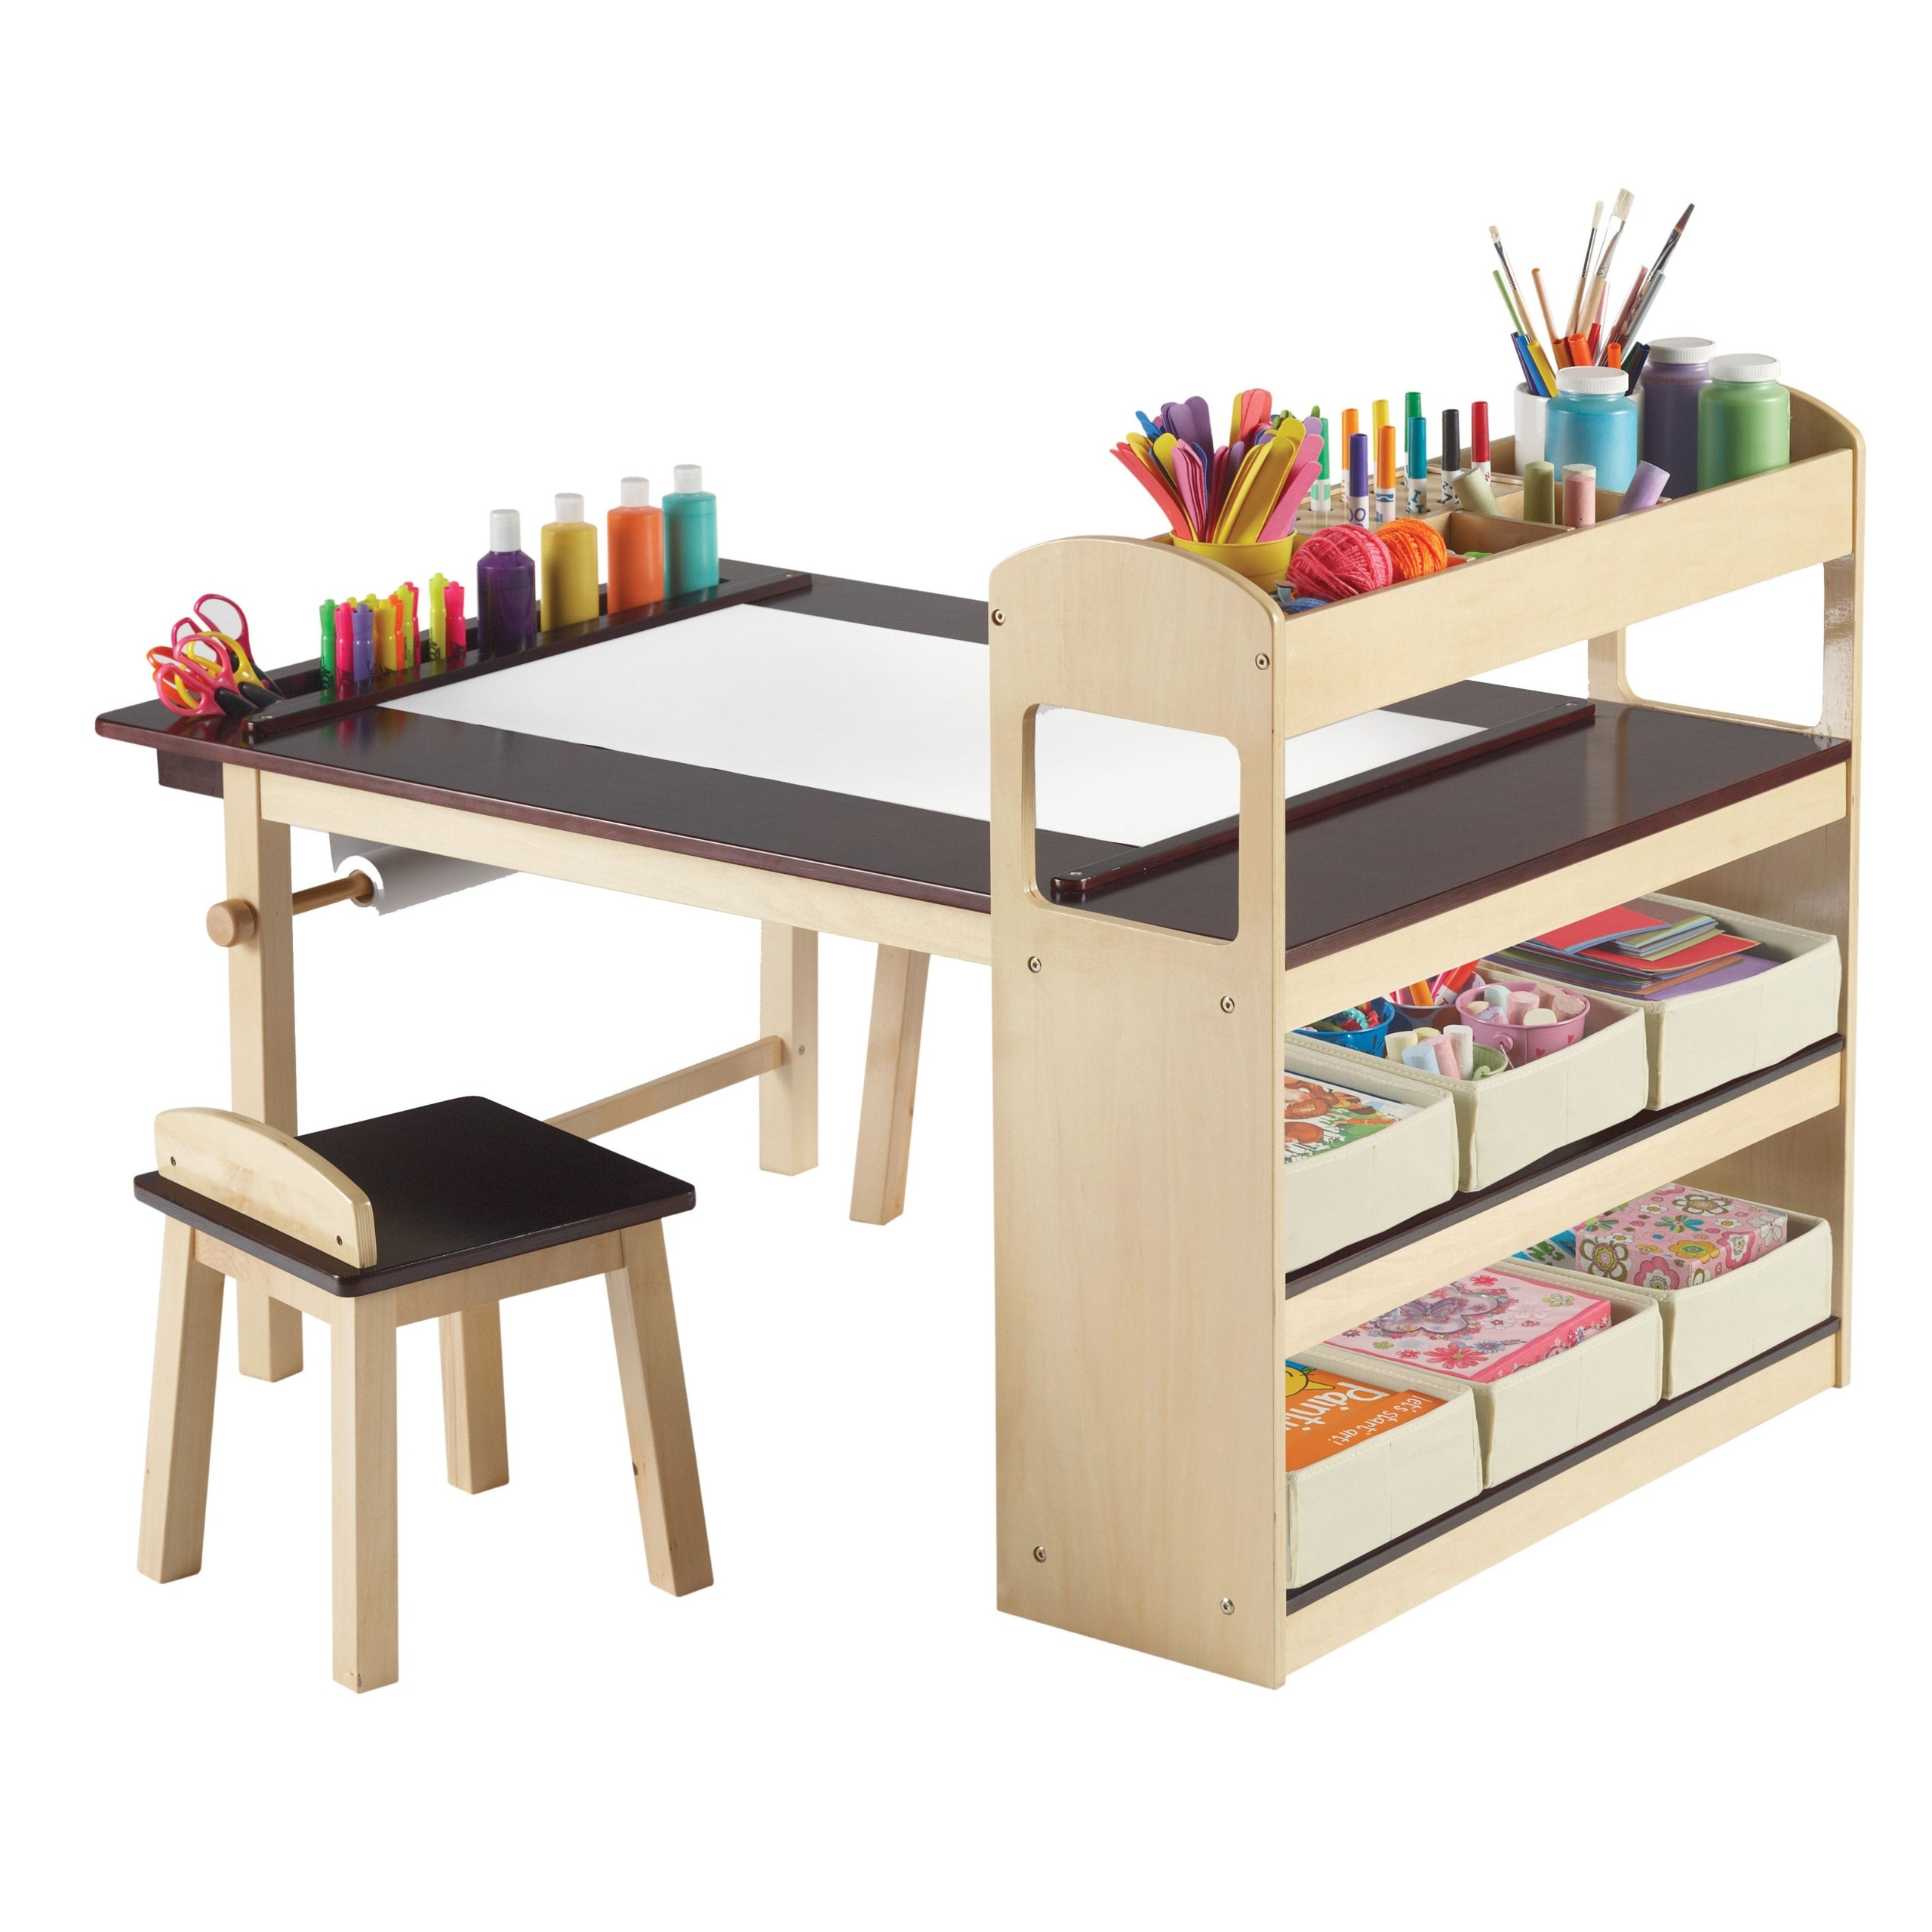 Kids art table with storage